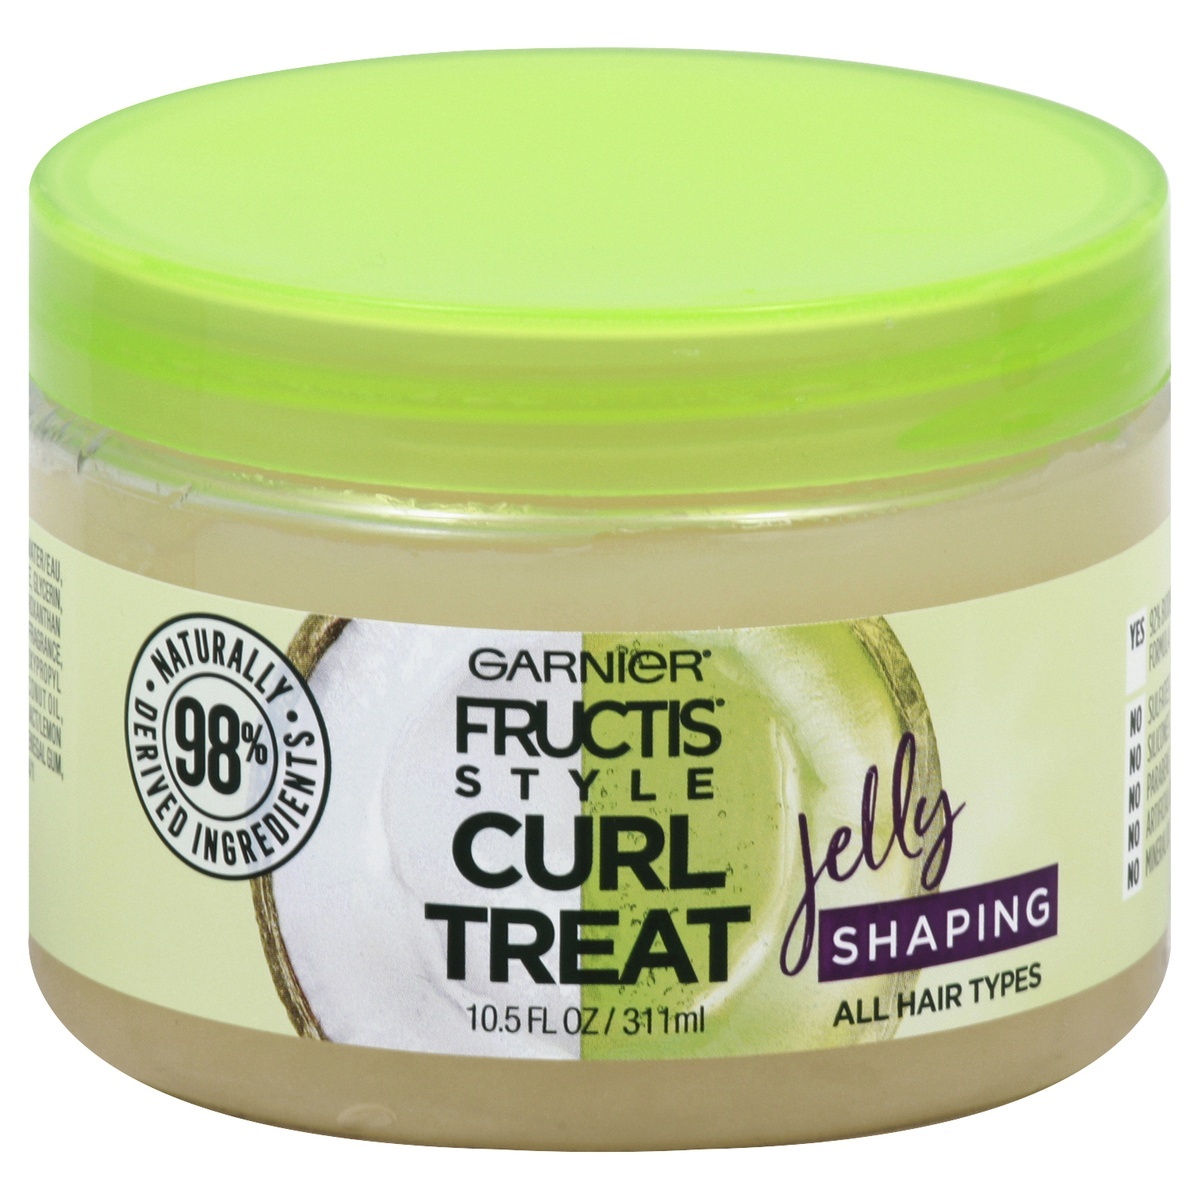 slide 1 of 7, Garnier Fructis Style Curl Treat Jelly Shaping Leave-In Styler To Shape Curls, 10.5 oz